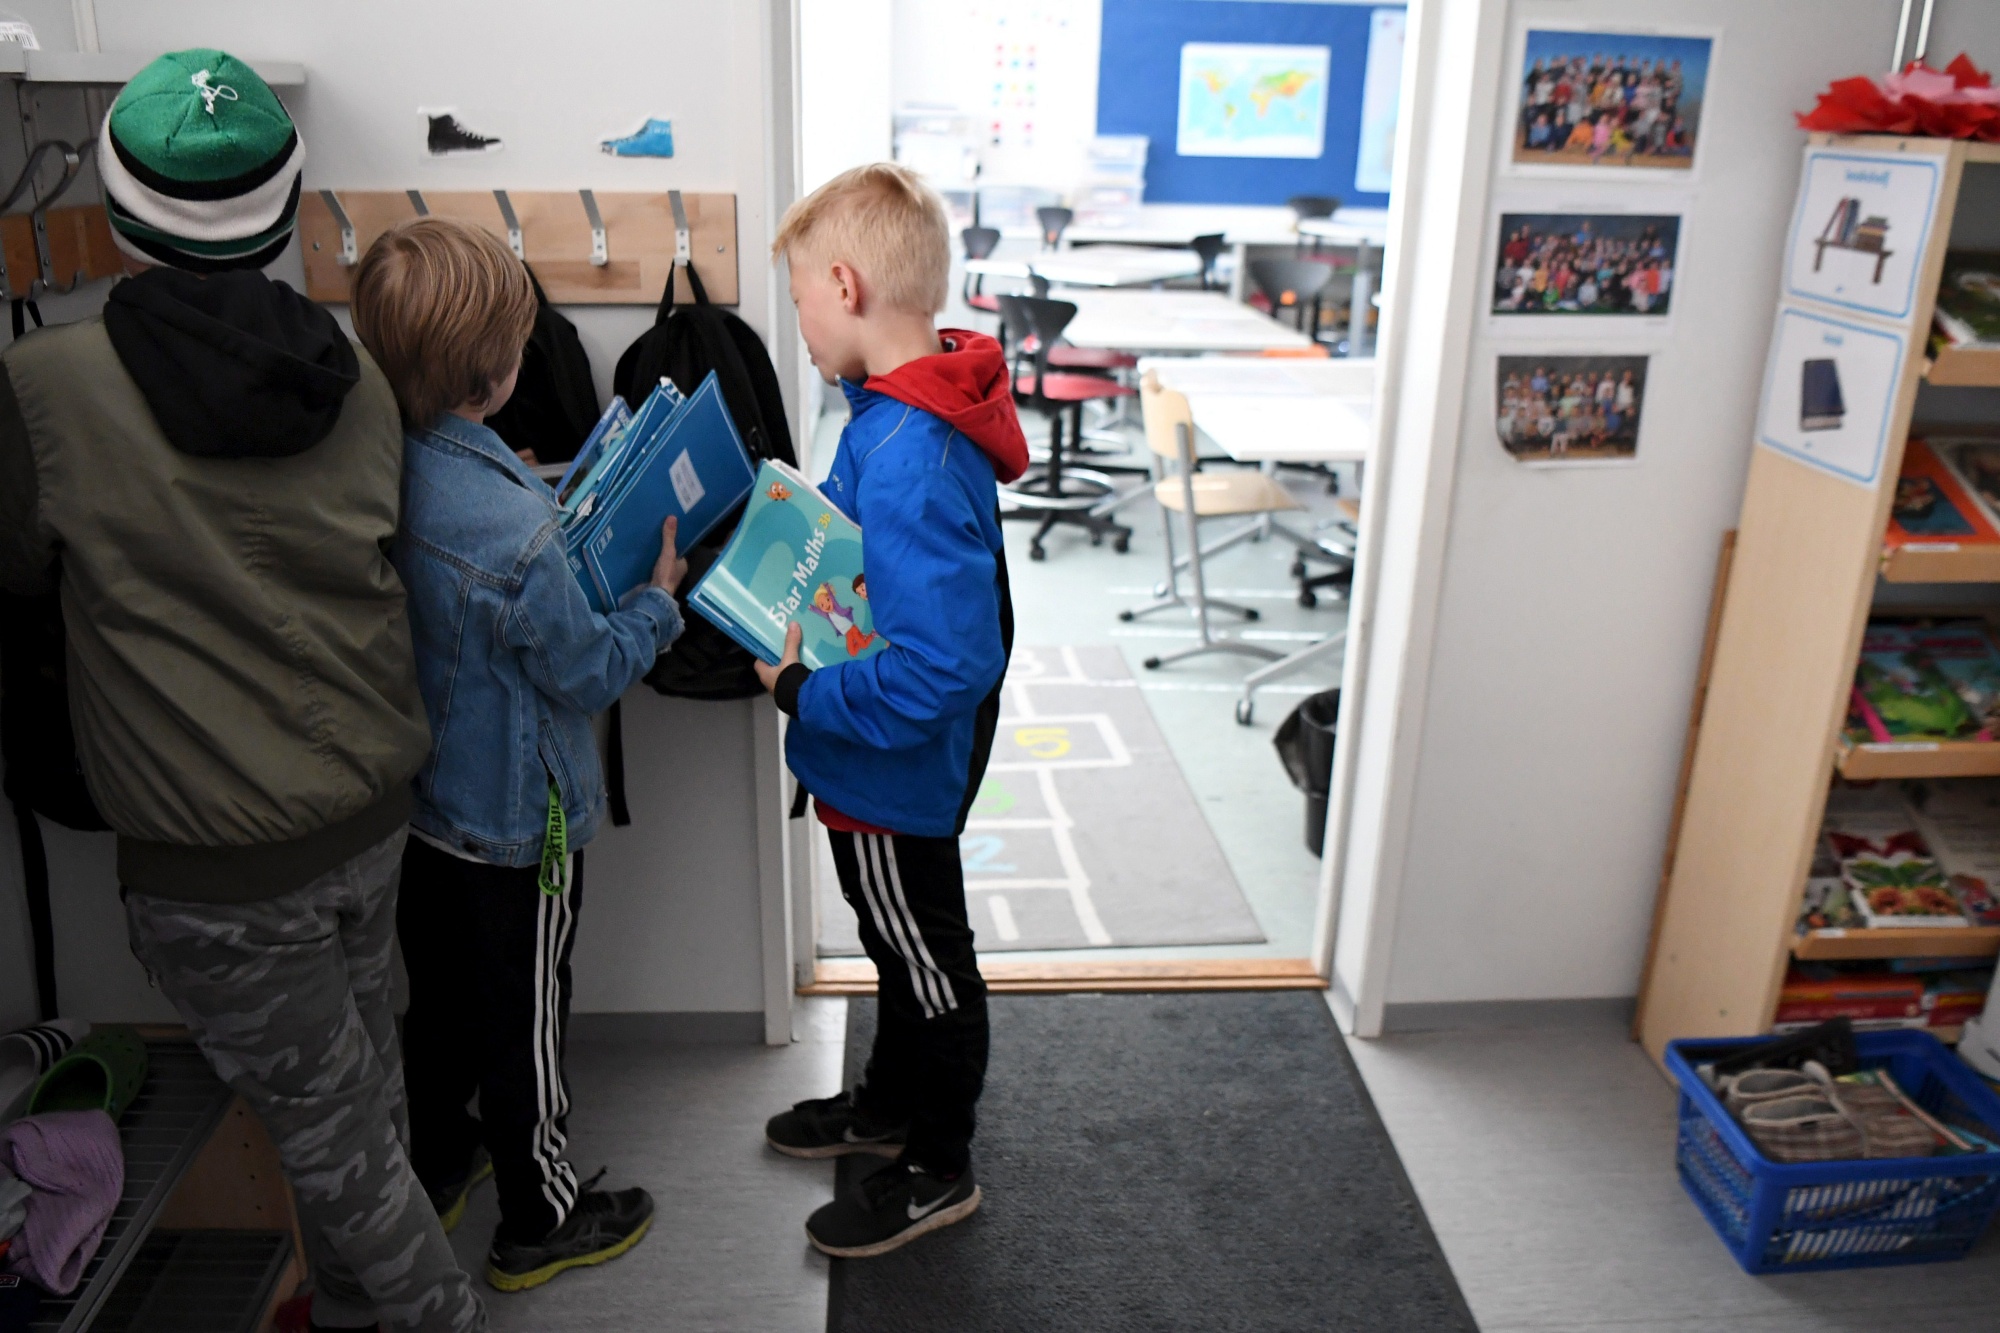 Pupils get ready for a class at an elementary school in Helsinki in May.